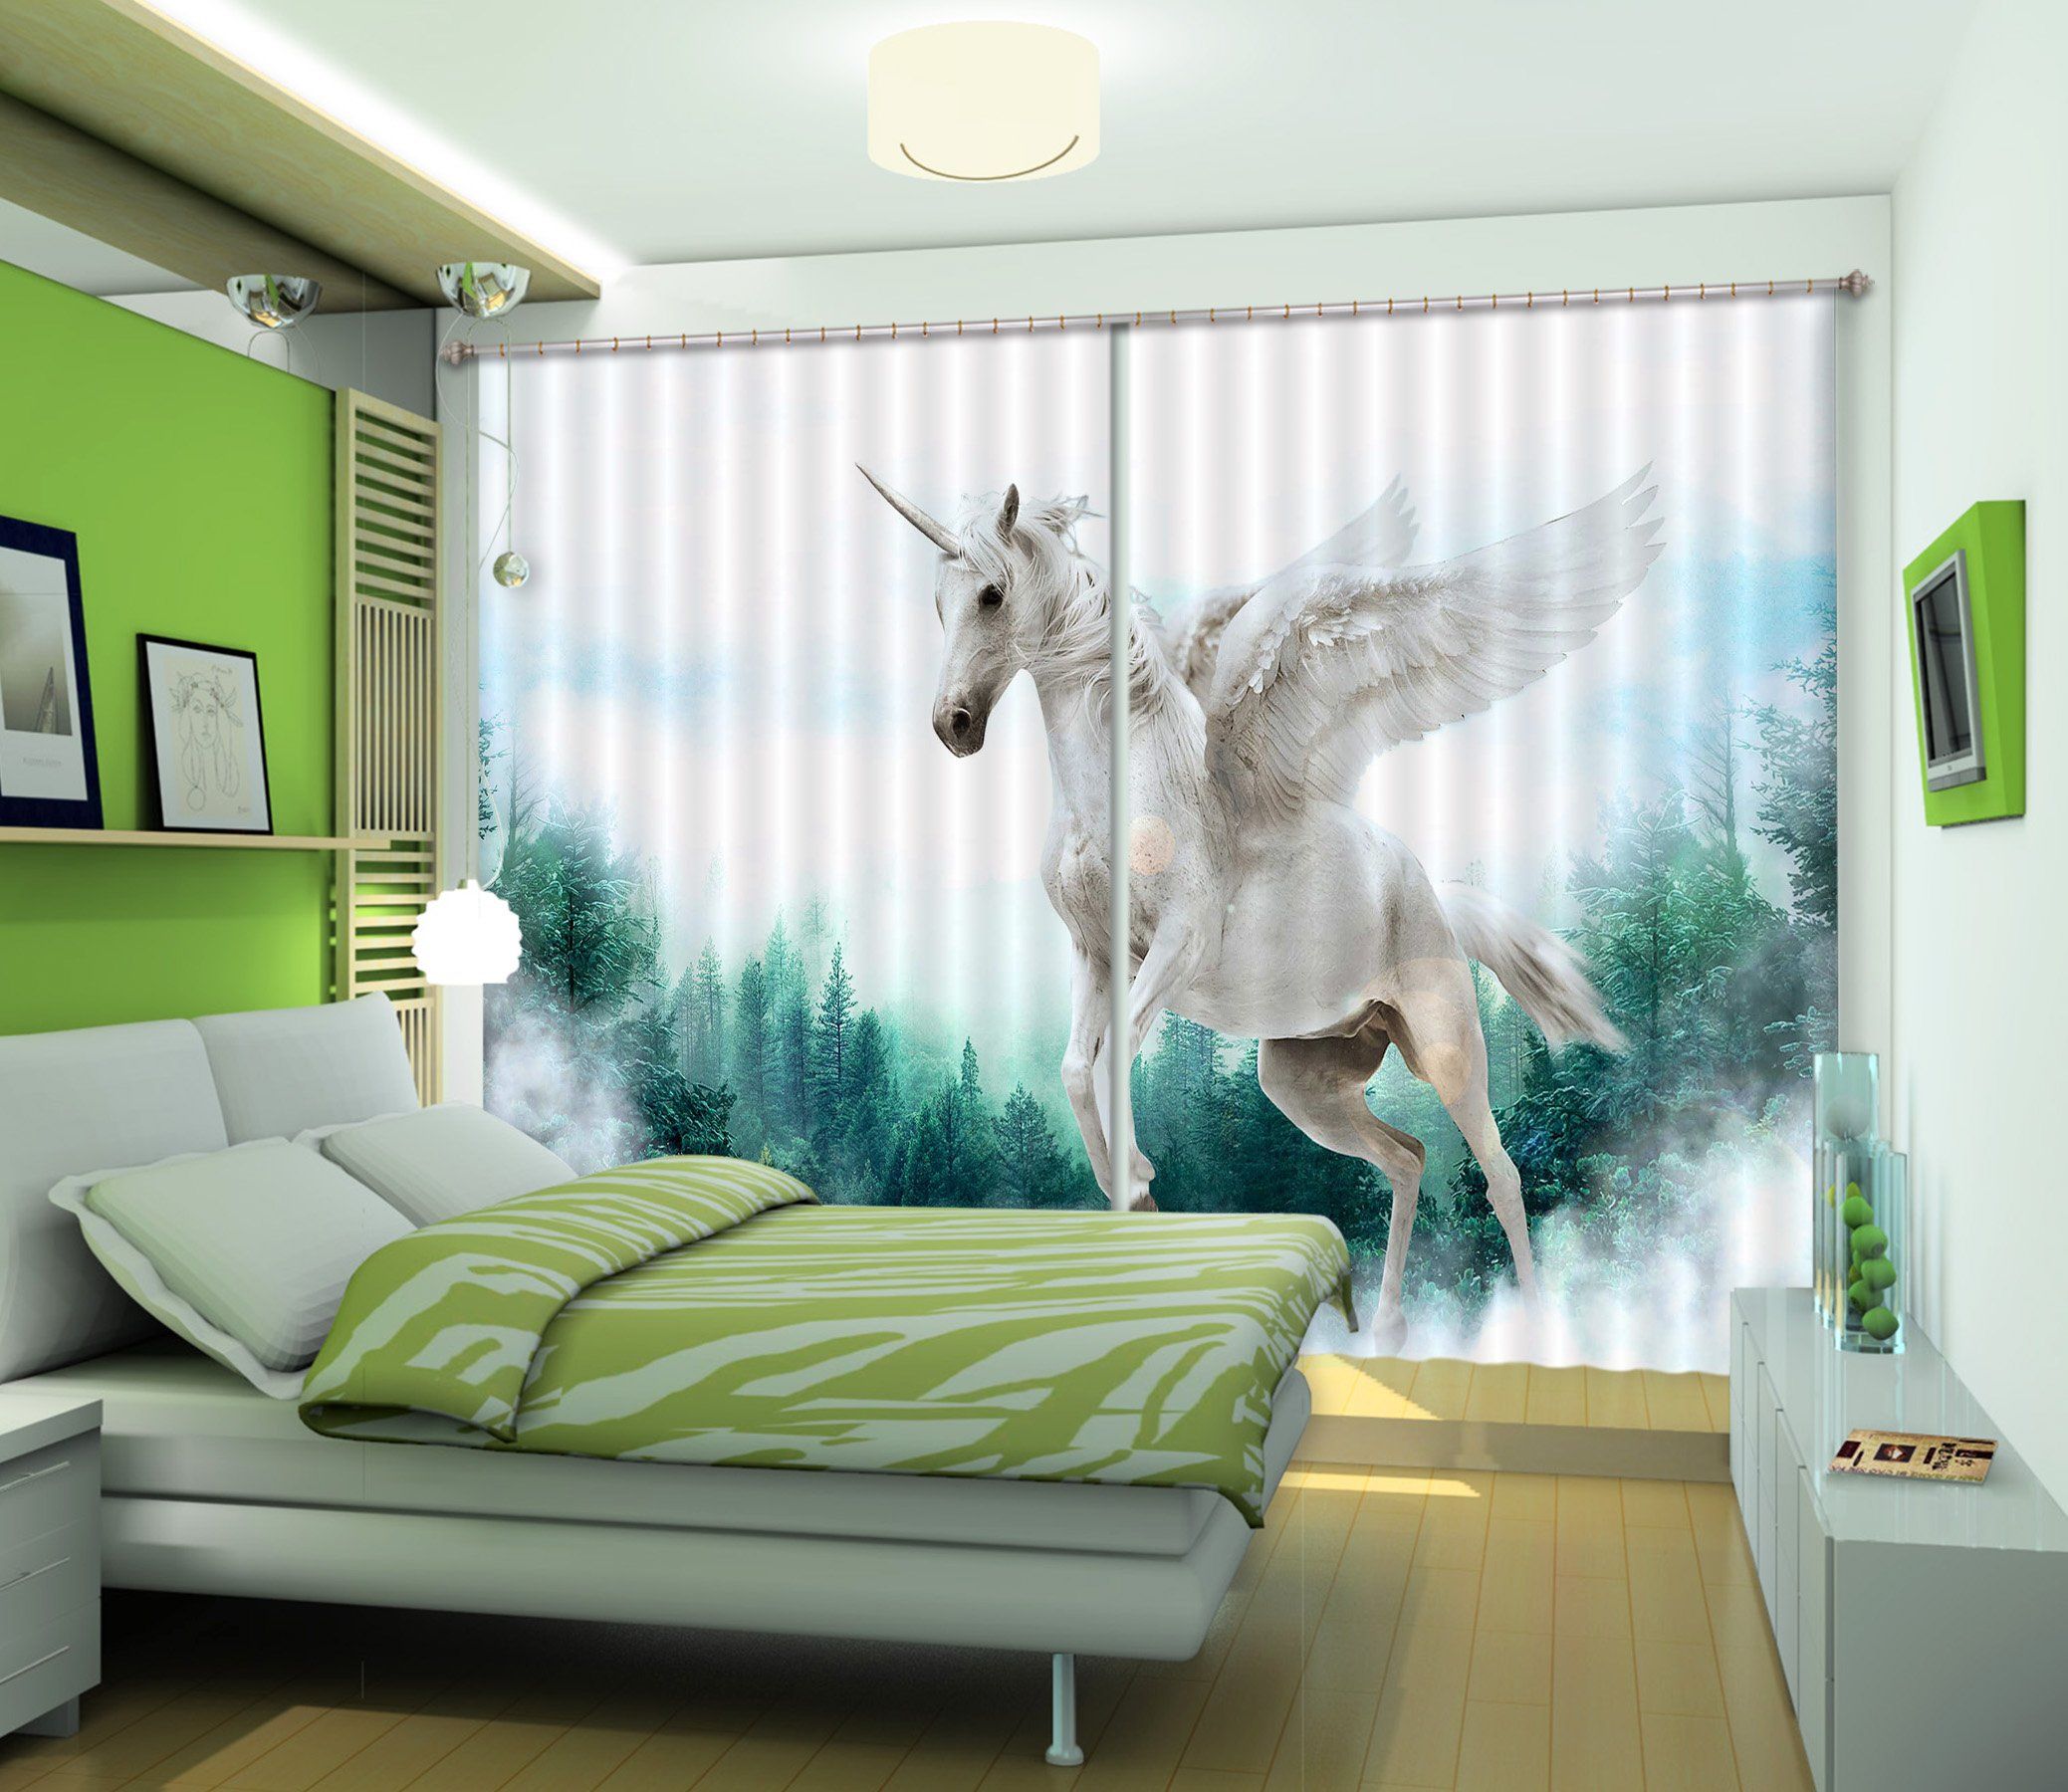 3D Forest Wing Unicorn 080 Curtains Drapes Curtains AJ Creativity Home 